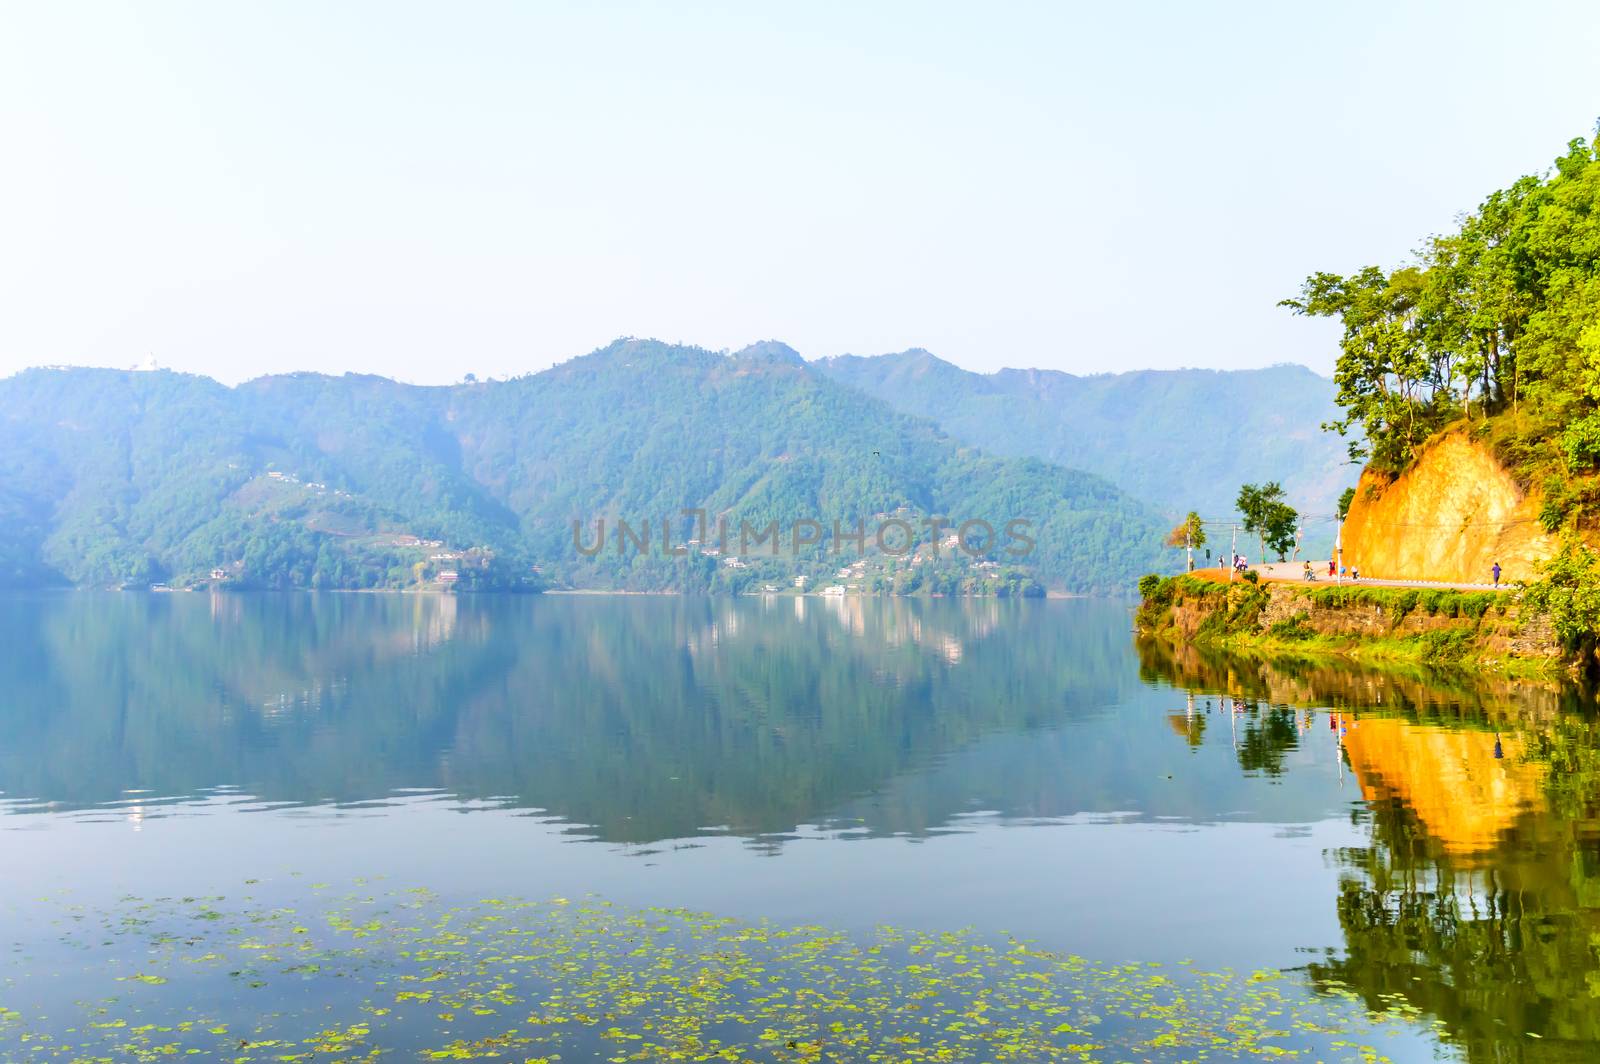 Photograph of autumn colourful lake, mountain, clear sky with reflexation in water. Wide angle landscape of Pokhara Lake at Kathmandu Nepal. Vintage film look. Vacation Freedom, Simplicity Concept. by sudiptabhowmick